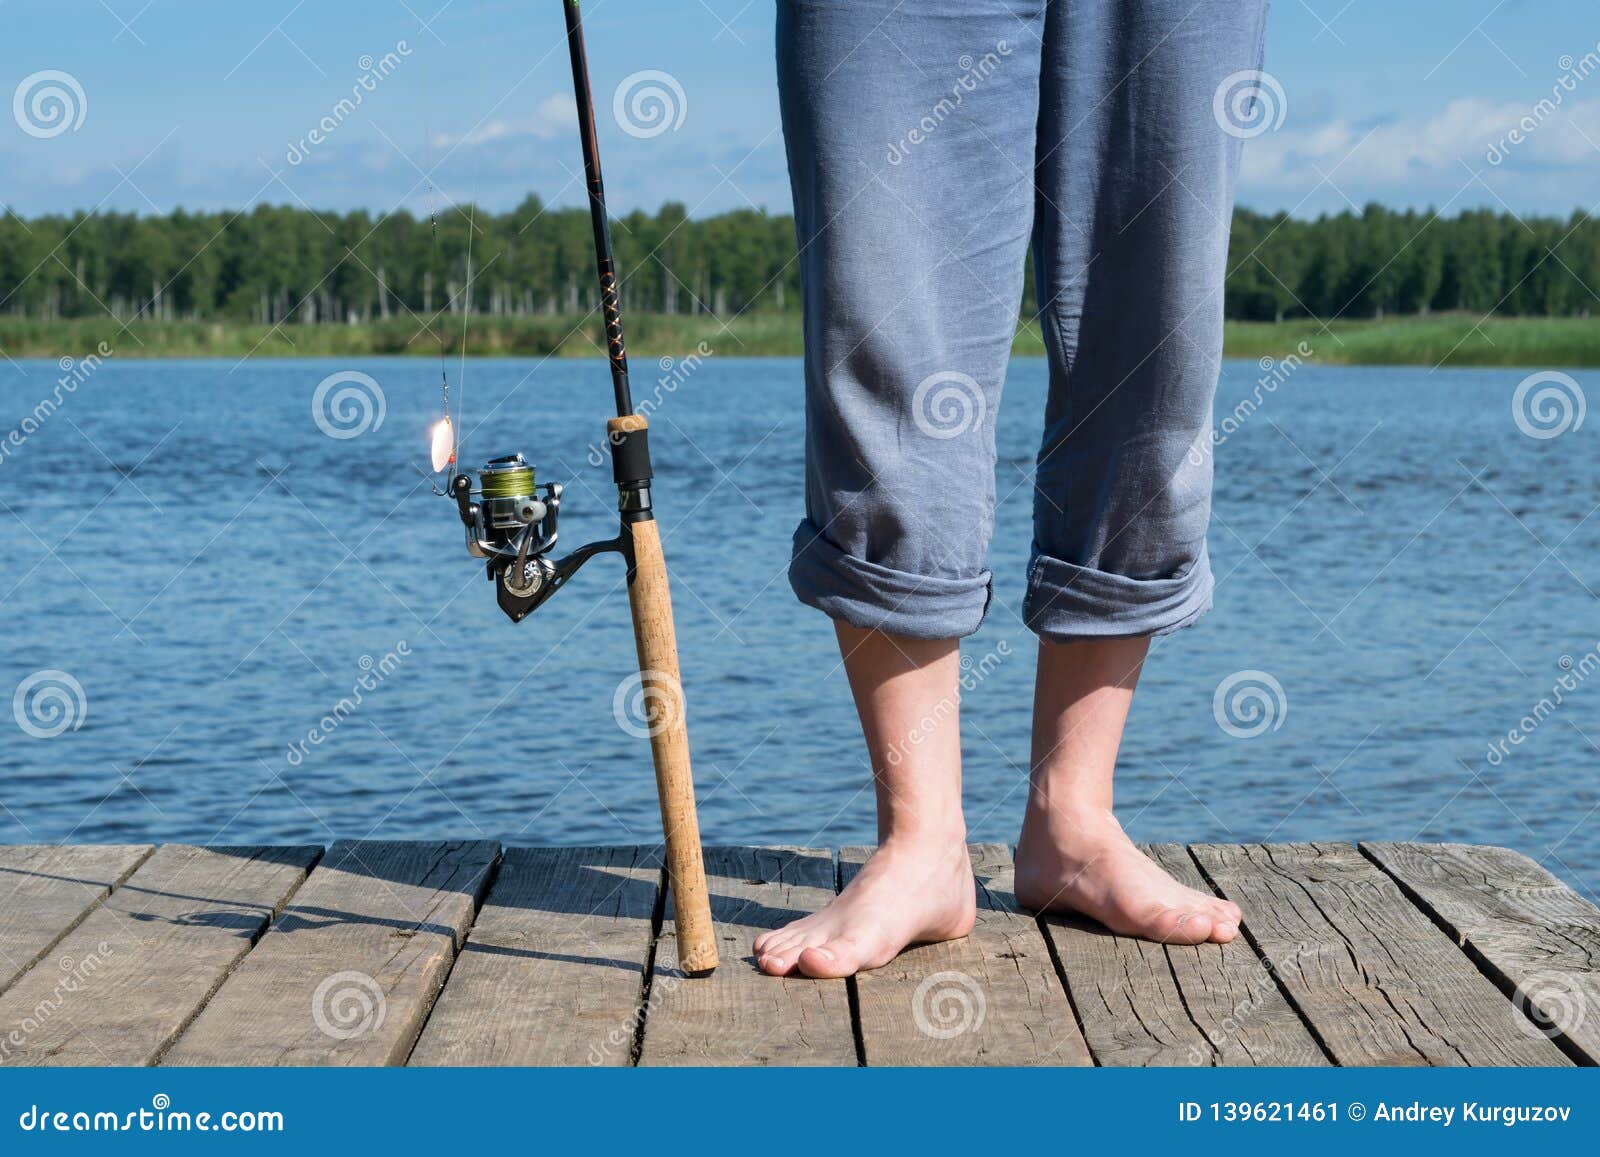 Fishing Rod and Legs of the Fisherman Stand on the Pier